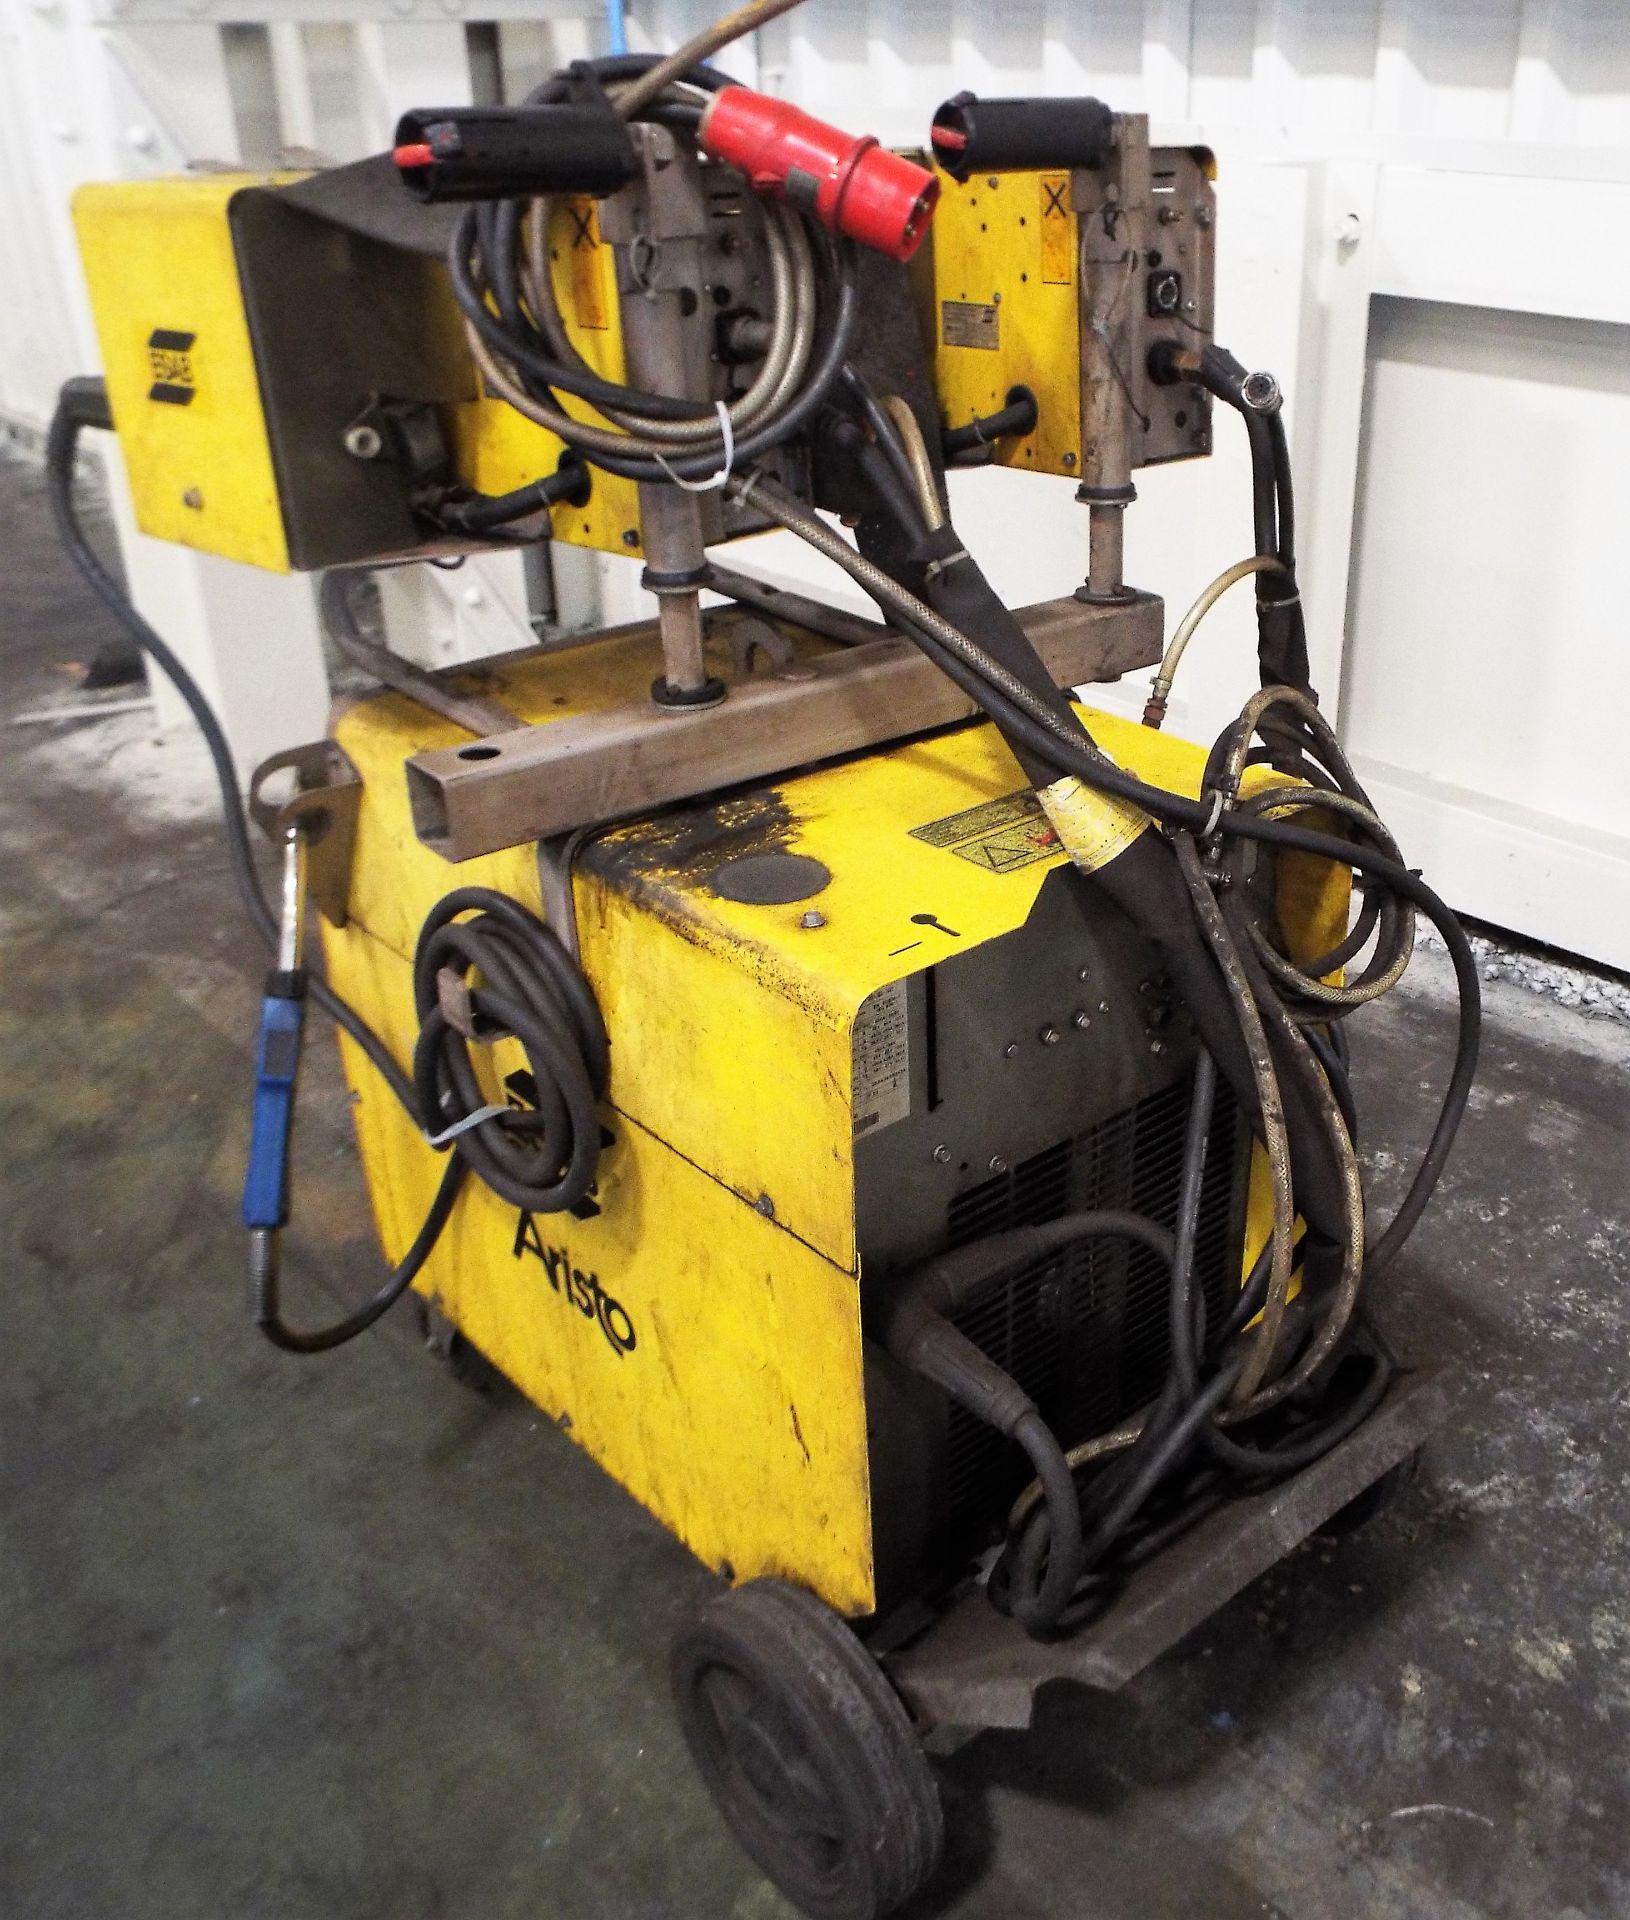 Esab Aristo LUD 450 Portable Welding Set with dual station MEK 44C Wire Feeds & PUA-1 Pendant. - Image 4 of 7